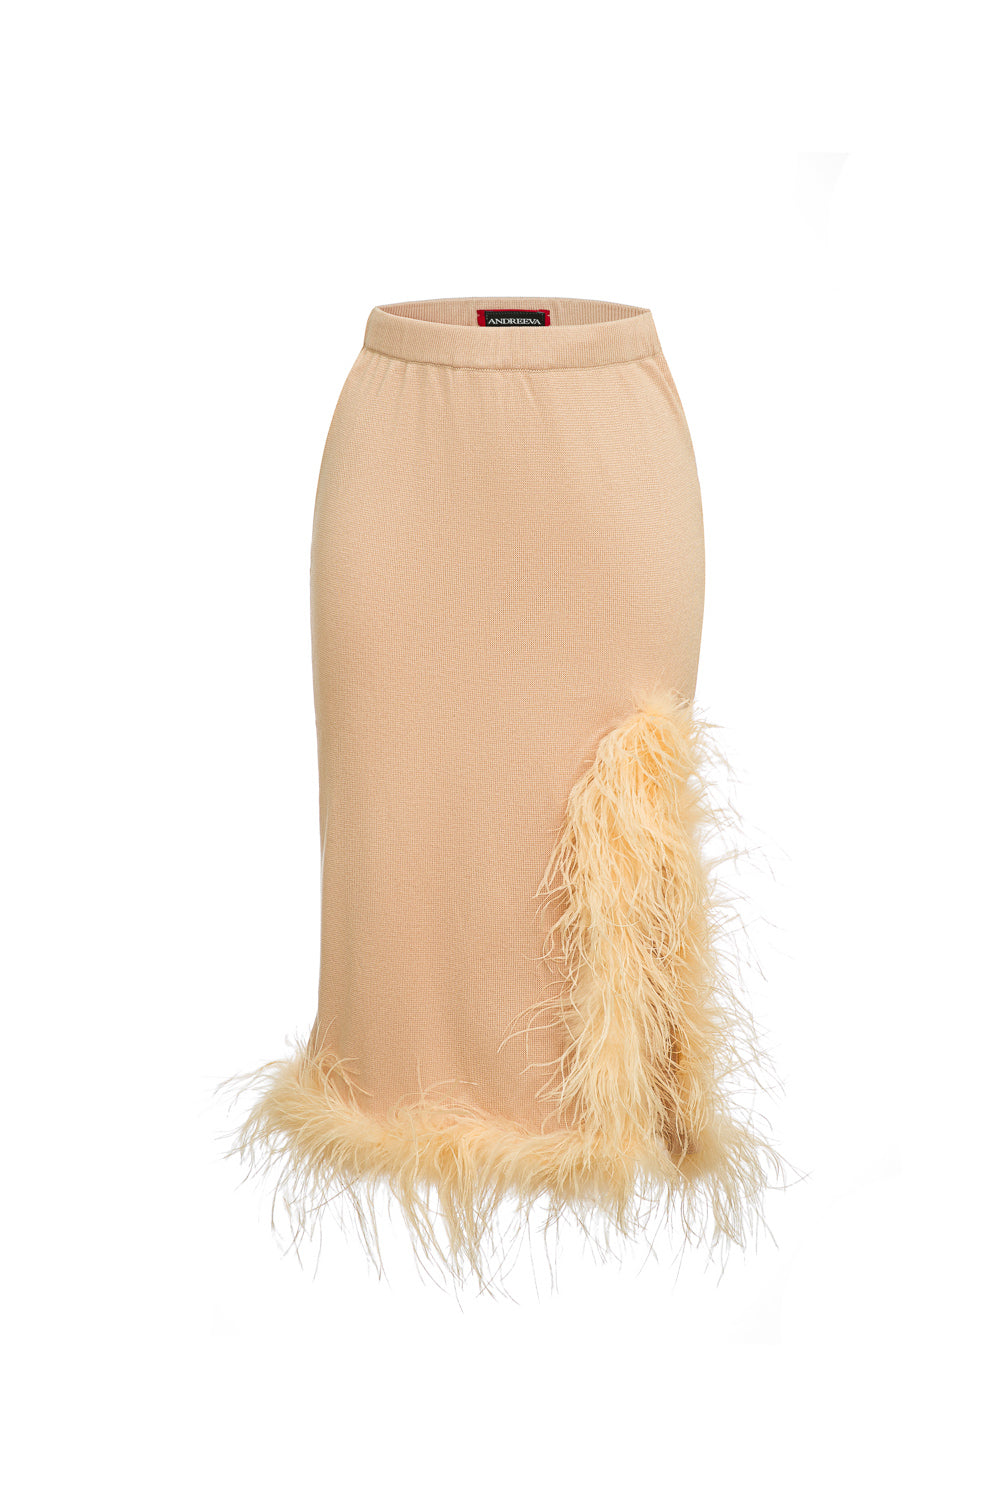 andreeva peach knit skirt with feathers